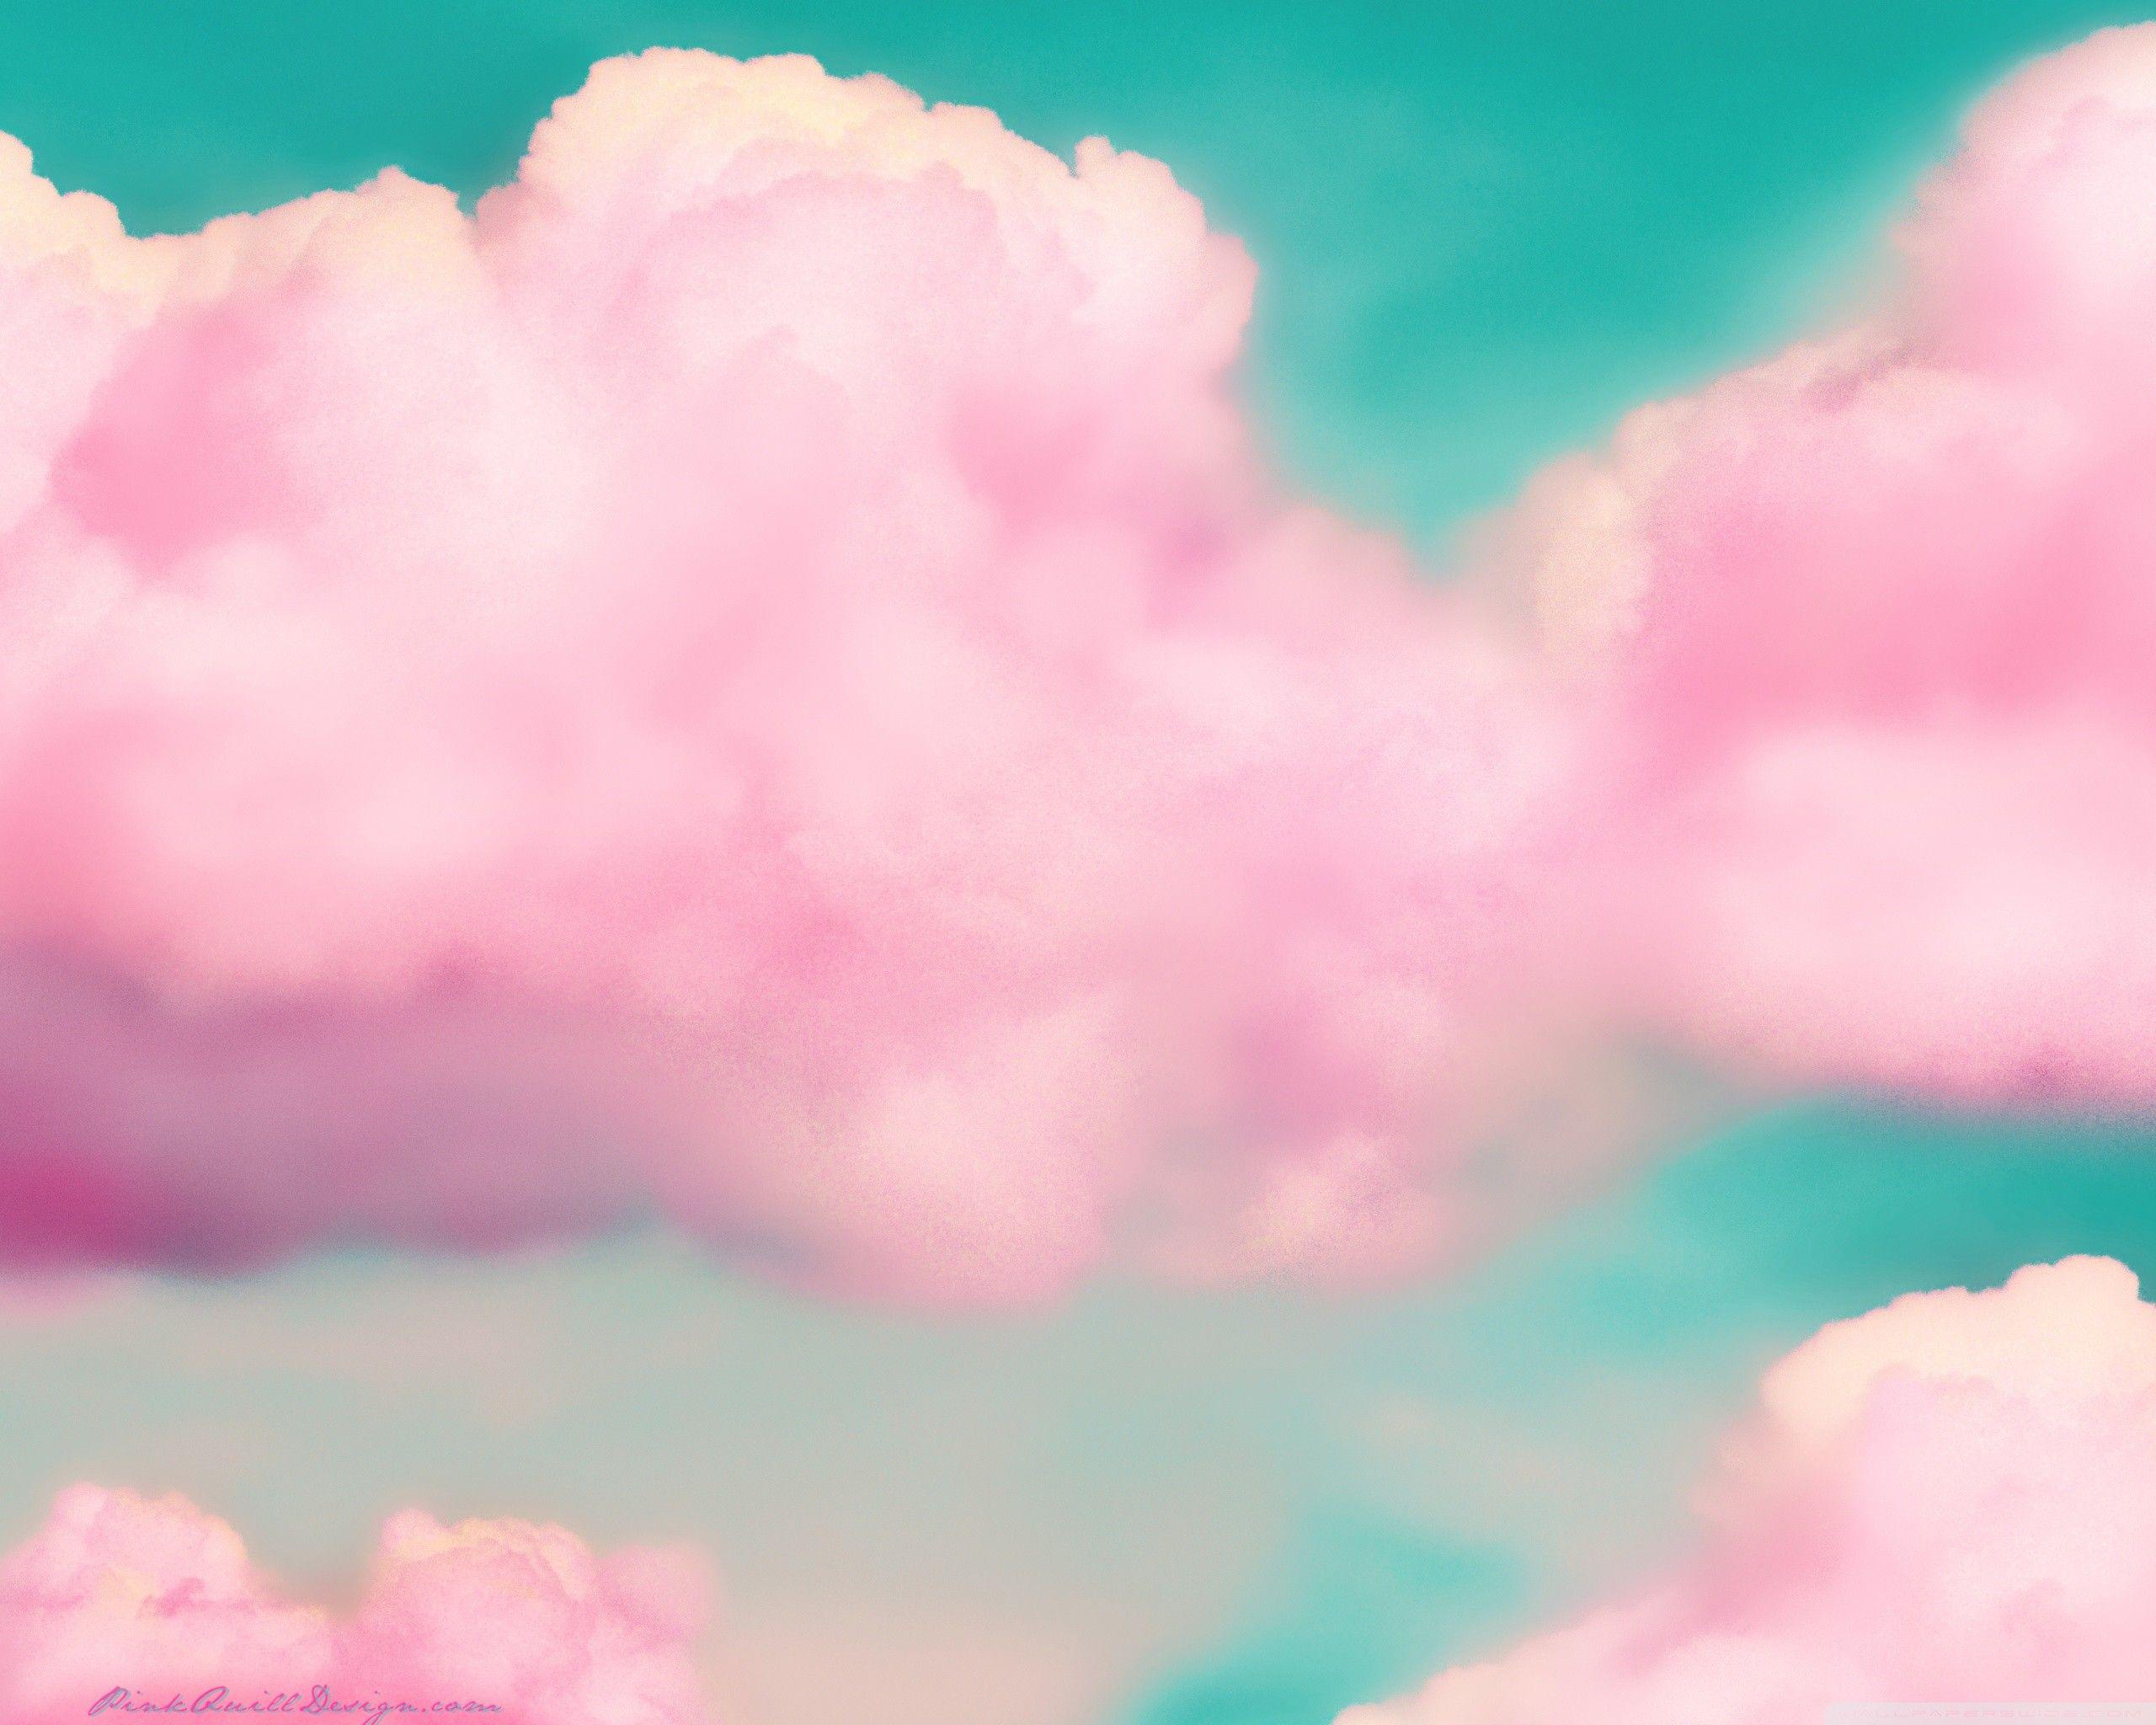 Cotton Candy Wallpapers Top Free Cotton Candy Backgrounds Images, Photos, Reviews